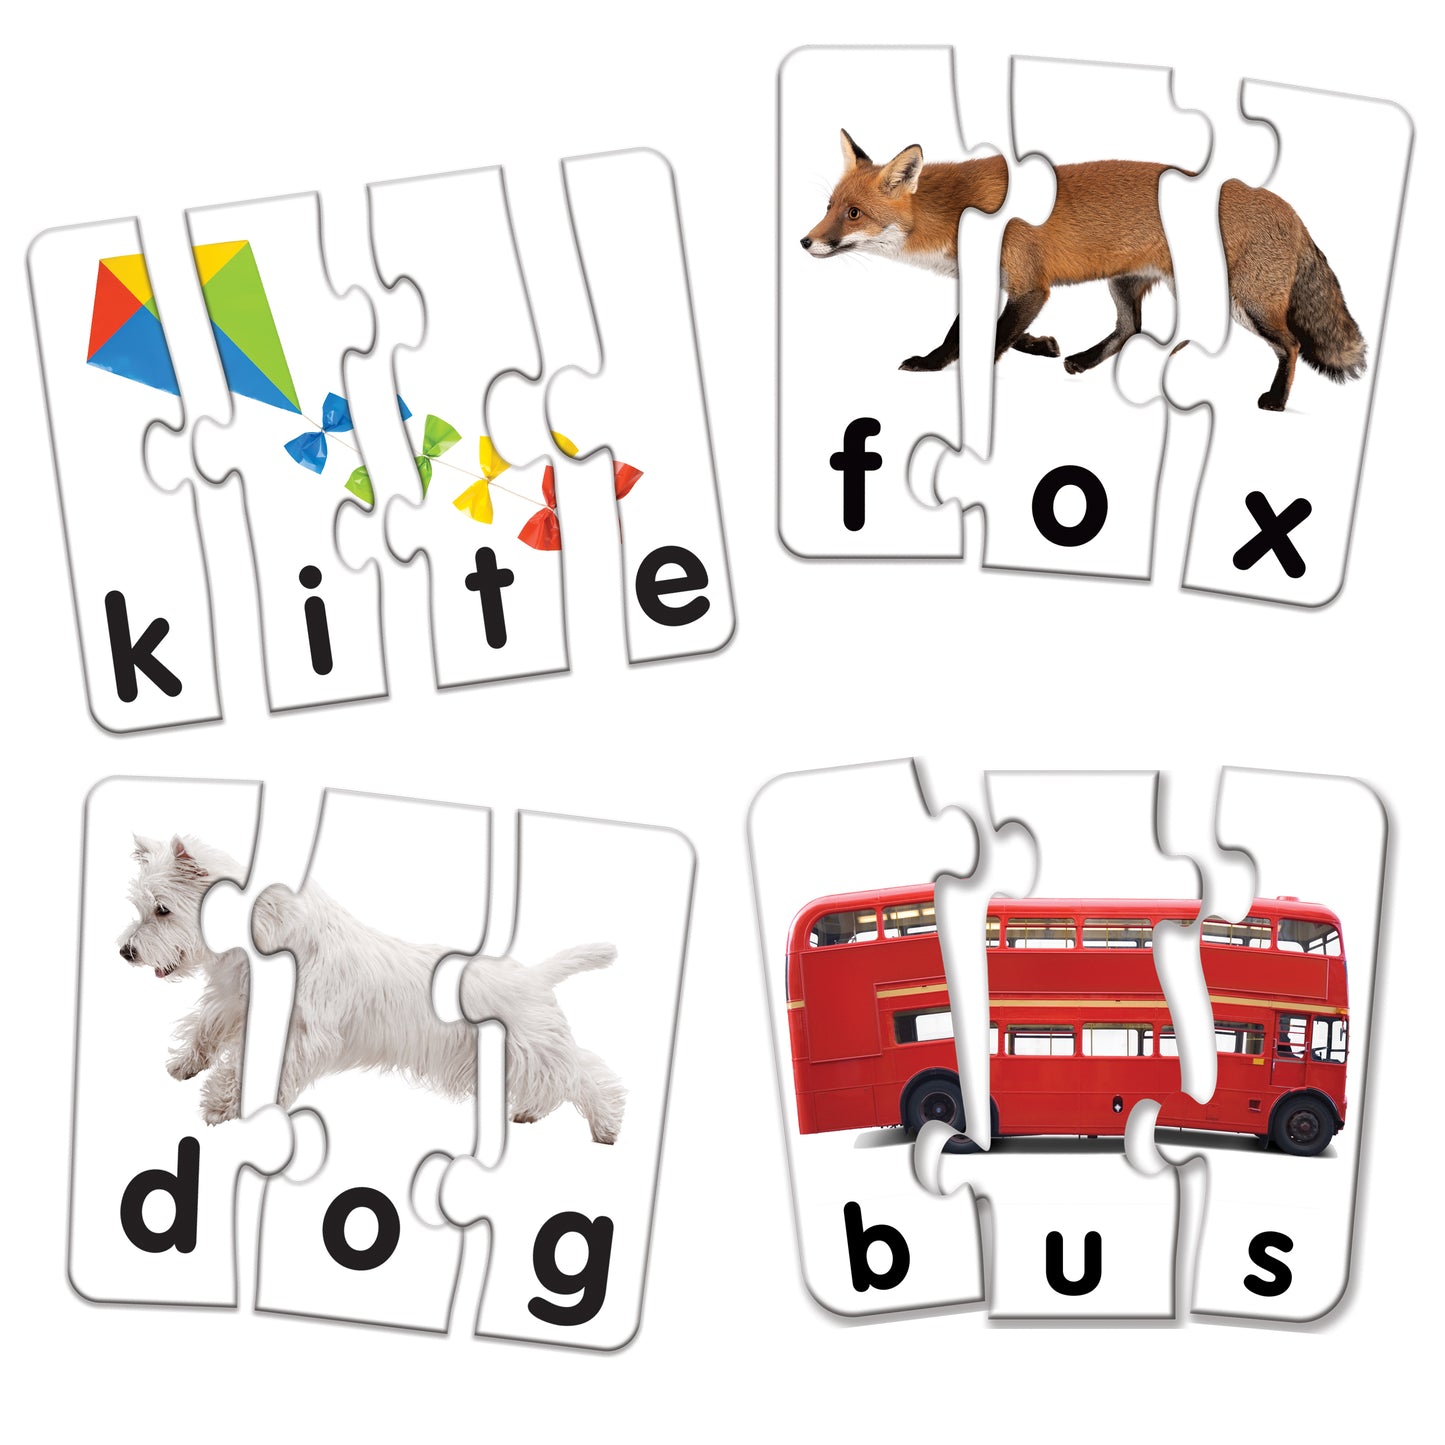 Match It! Spelling | Jigsaw Puzzles For Kids